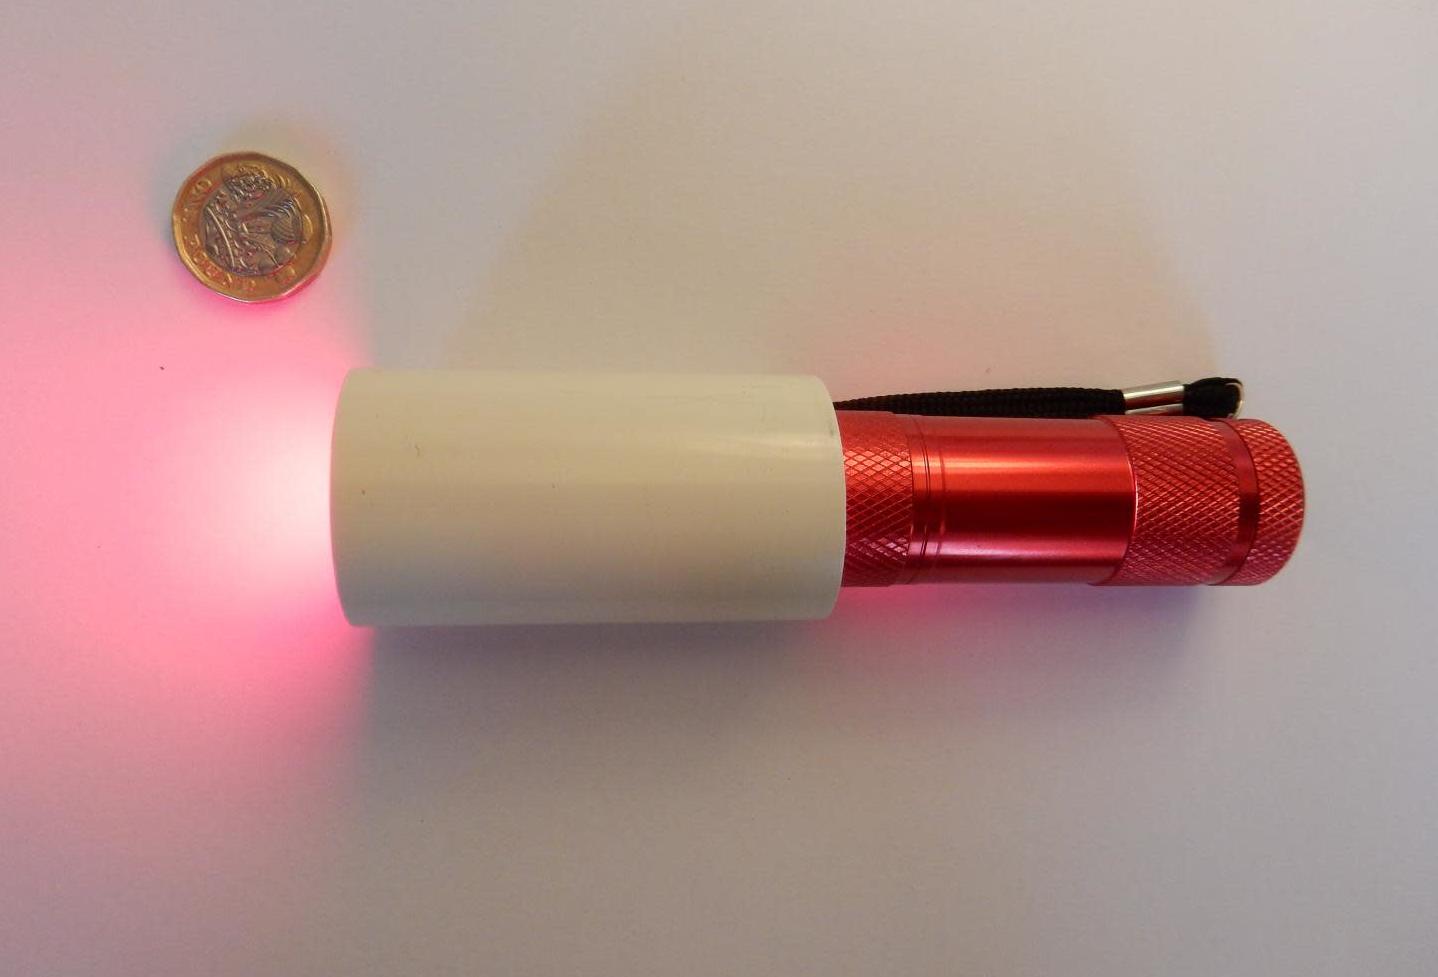 An example of handheld LED torch used in study. (Photo: University College London)